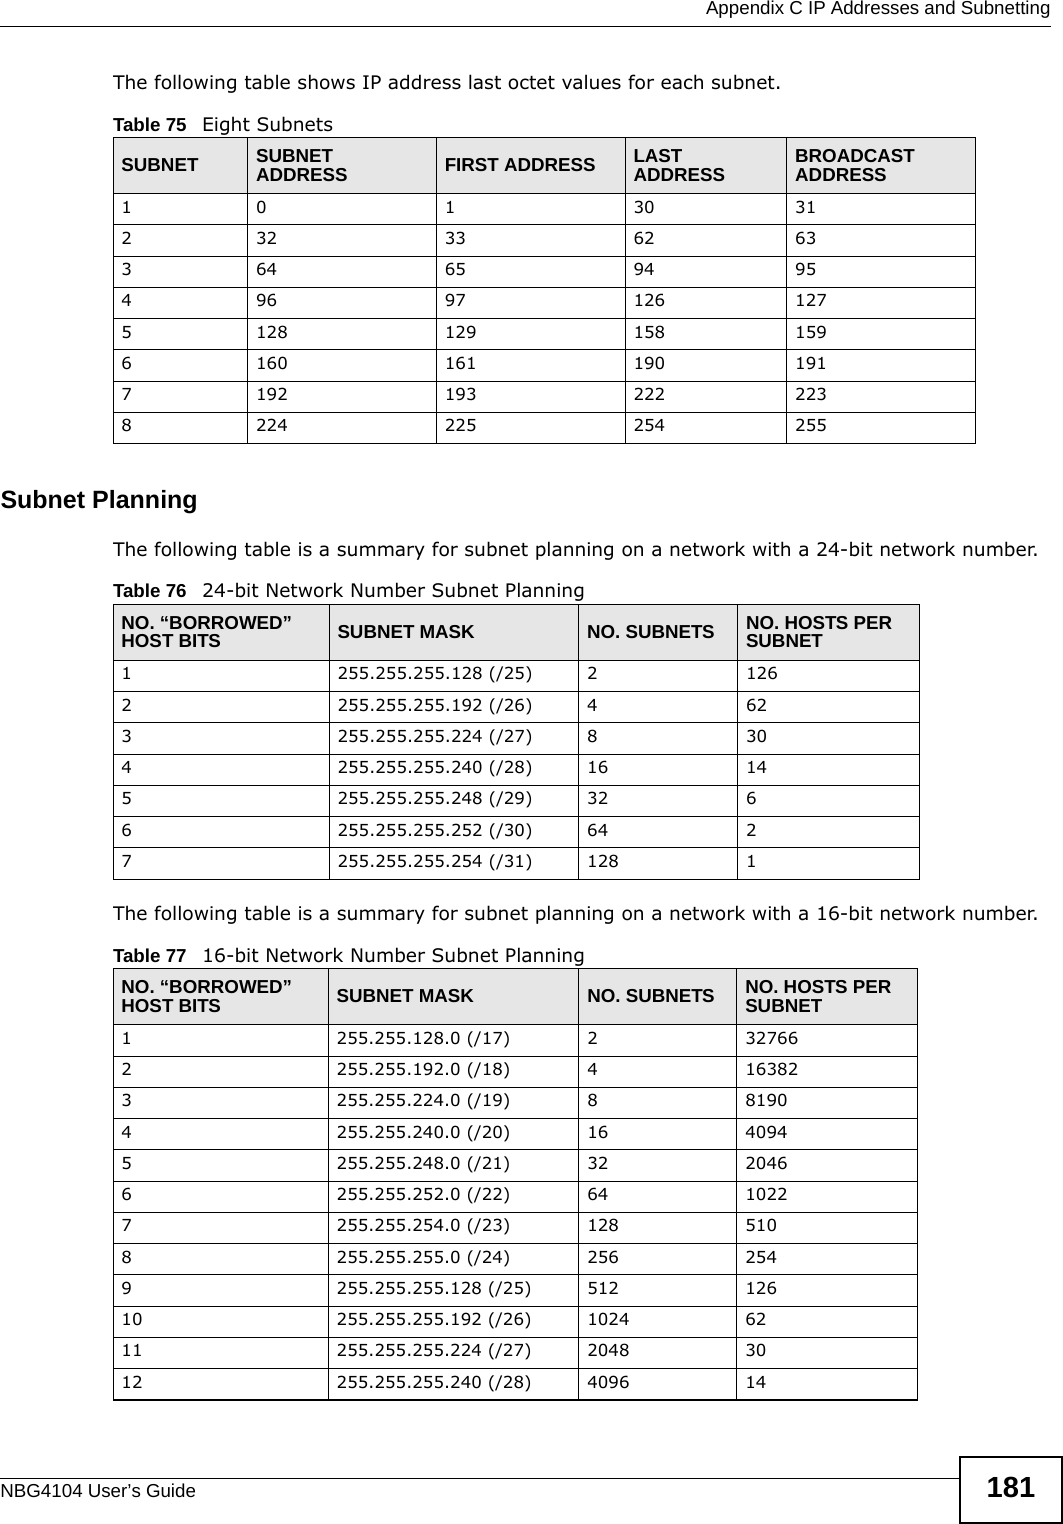  Appendix C IP Addresses and SubnettingNBG4104 User’s Guide 181The following table shows IP address last octet values for each subnet.Subnet PlanningThe following table is a summary for subnet planning on a network with a 24-bit network number.The following table is a summary for subnet planning on a network with a 16-bit network number. Table 75   Eight SubnetsSUBNET SUBNET ADDRESS FIRST ADDRESS LAST ADDRESS BROADCAST ADDRESS1 0 1 30 31232 33 62 63364 65 94 95496 97 126 1275128 129 158 1596160 161 190 1917192 193 222 2238224 225 254 255Table 76   24-bit Network Number Subnet PlanningNO. “BORROWED” HOST BITS SUBNET MASK NO. SUBNETS NO. HOSTS PER SUBNET1255.255.255.128 (/25) 21262255.255.255.192 (/26) 4623255.255.255.224 (/27) 8304255.255.255.240 (/28) 16 145255.255.255.248 (/29) 32 66255.255.255.252 (/30) 64 27255.255.255.254 (/31) 128 1Table 77   16-bit Network Number Subnet PlanningNO. “BORROWED” HOST BITS SUBNET MASK NO. SUBNETS NO. HOSTS PER SUBNET1255.255.128.0 (/17) 2327662255.255.192.0 (/18) 4163823255.255.224.0 (/19) 881904255.255.240.0 (/20) 16 40945255.255.248.0 (/21) 32 20466255.255.252.0 (/22) 64 10227255.255.254.0 (/23) 128 5108255.255.255.0 (/24) 256 2549255.255.255.128 (/25) 512 12610 255.255.255.192 (/26) 1024 6211 255.255.255.224 (/27) 2048 3012 255.255.255.240 (/28) 4096 14